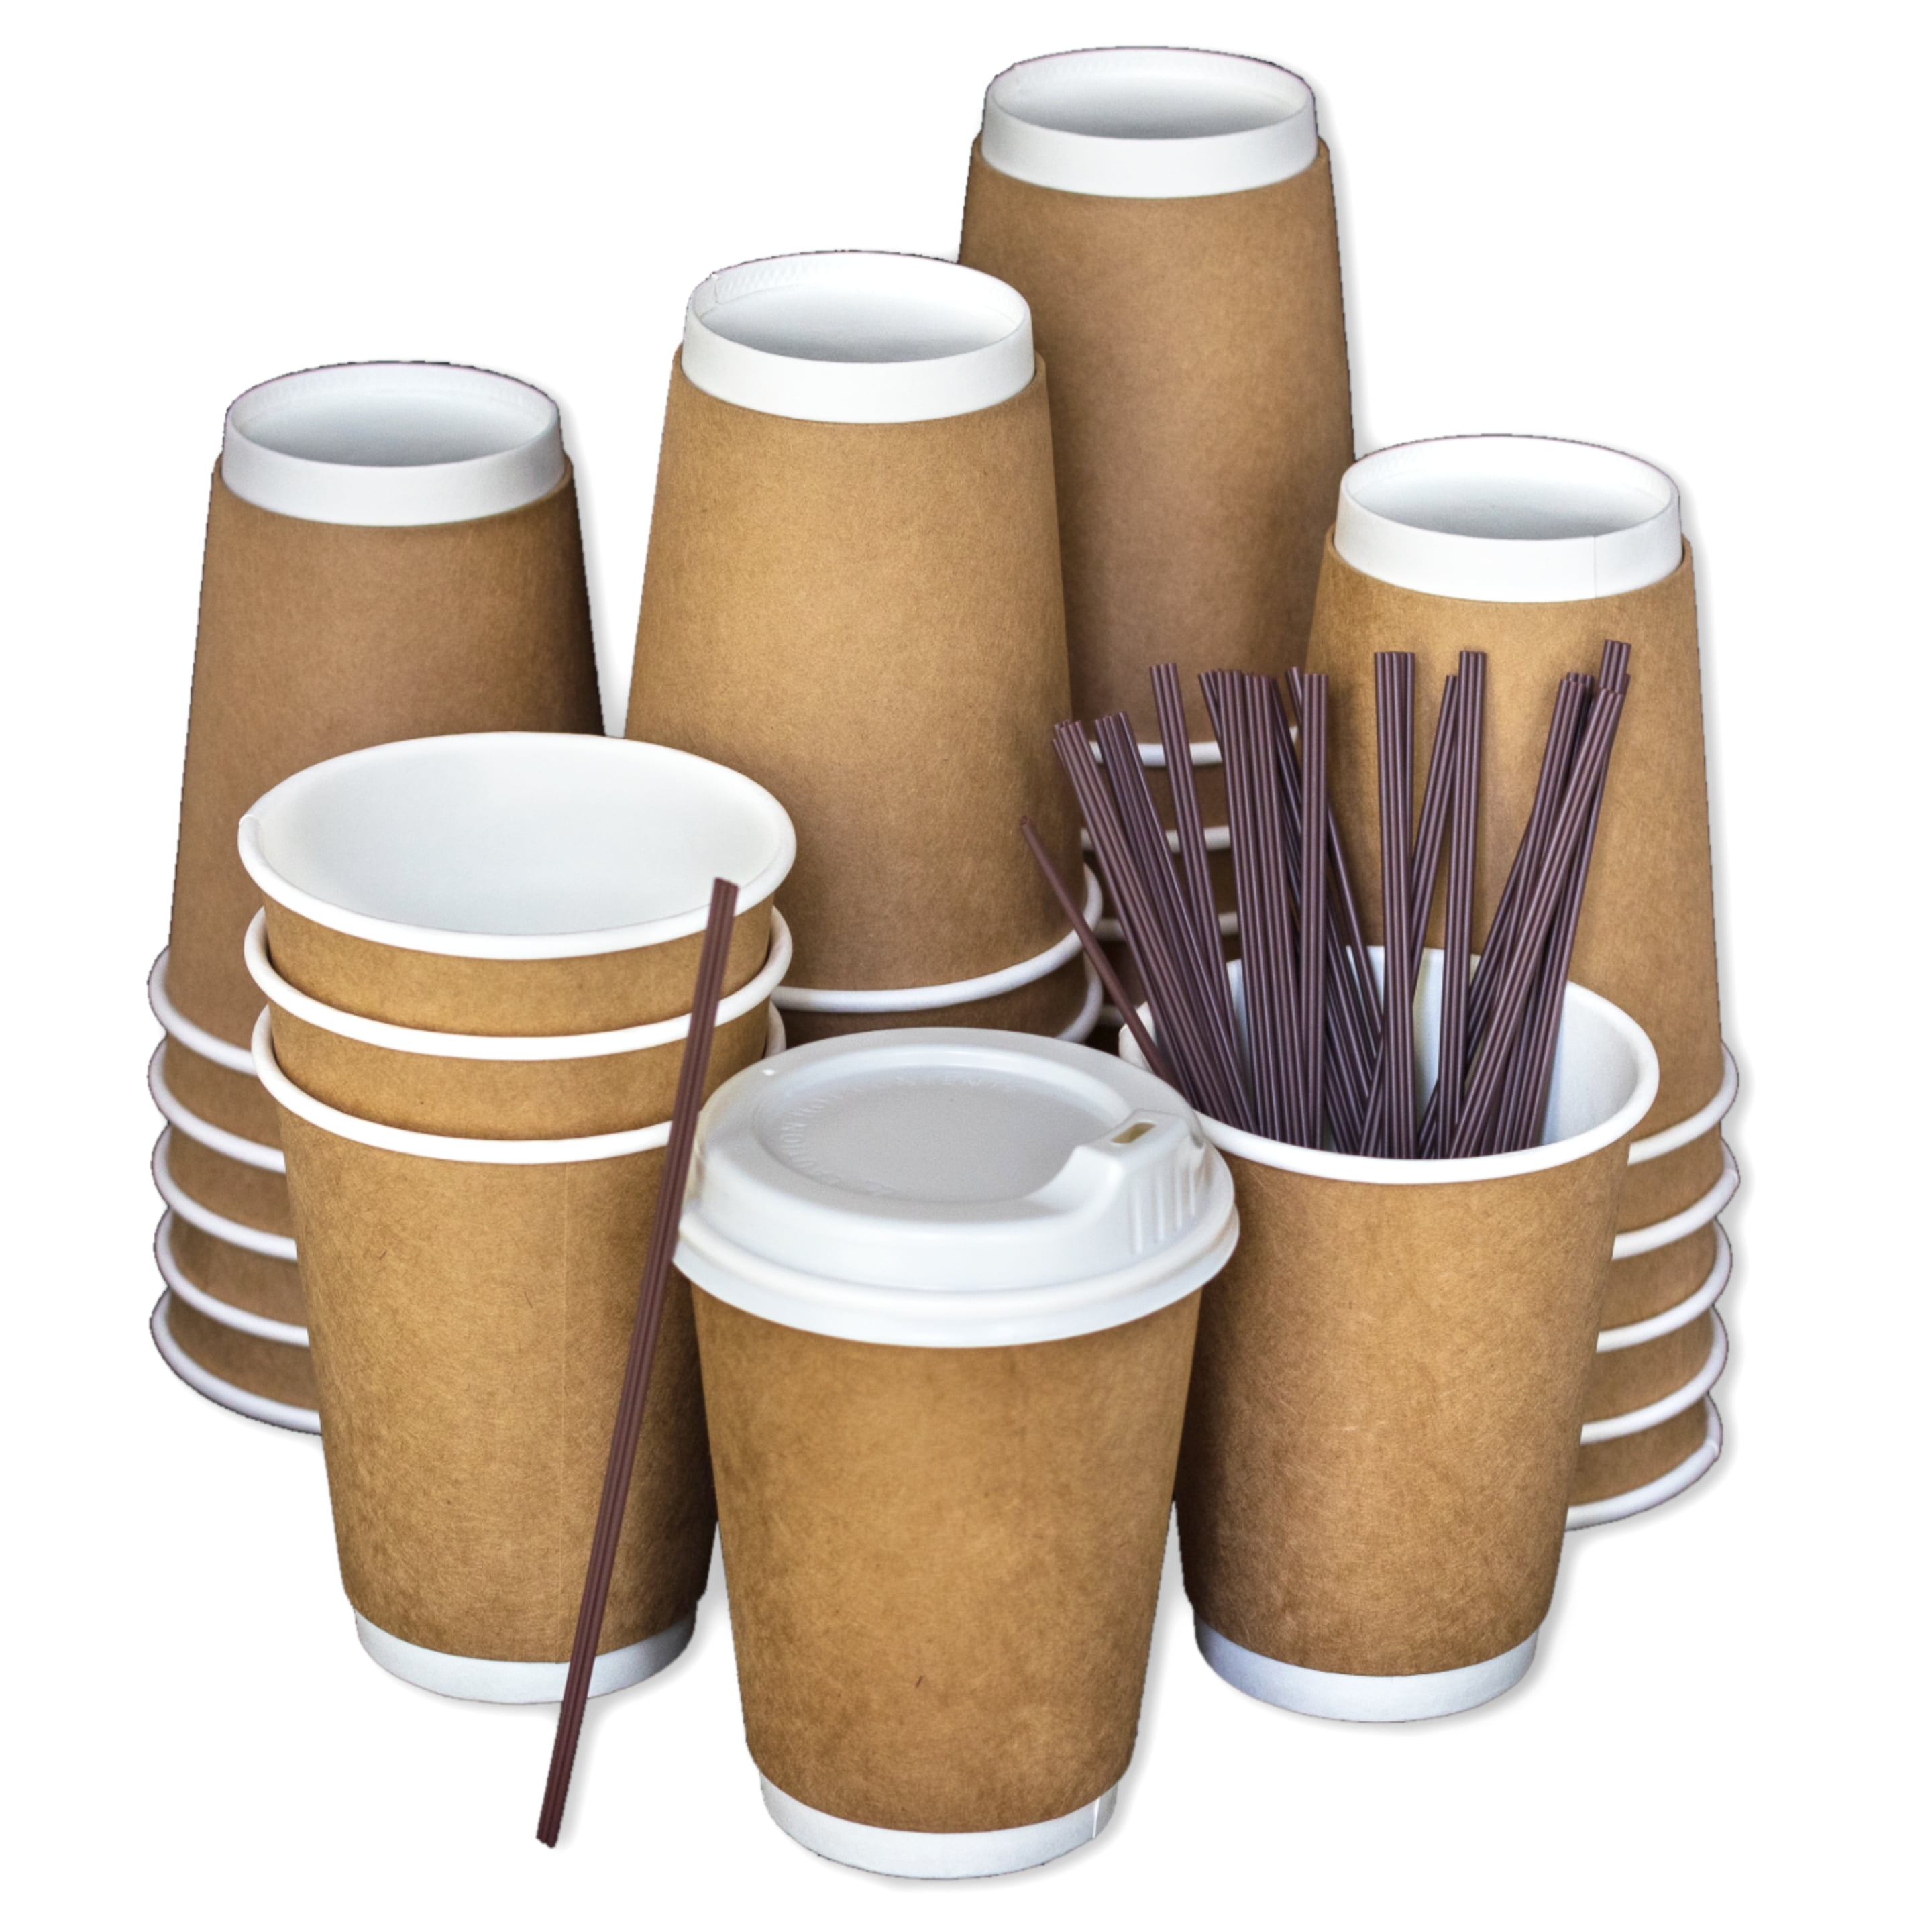 Disposable Coffee Cups To Go with Lids, Stirrers, and Integrated